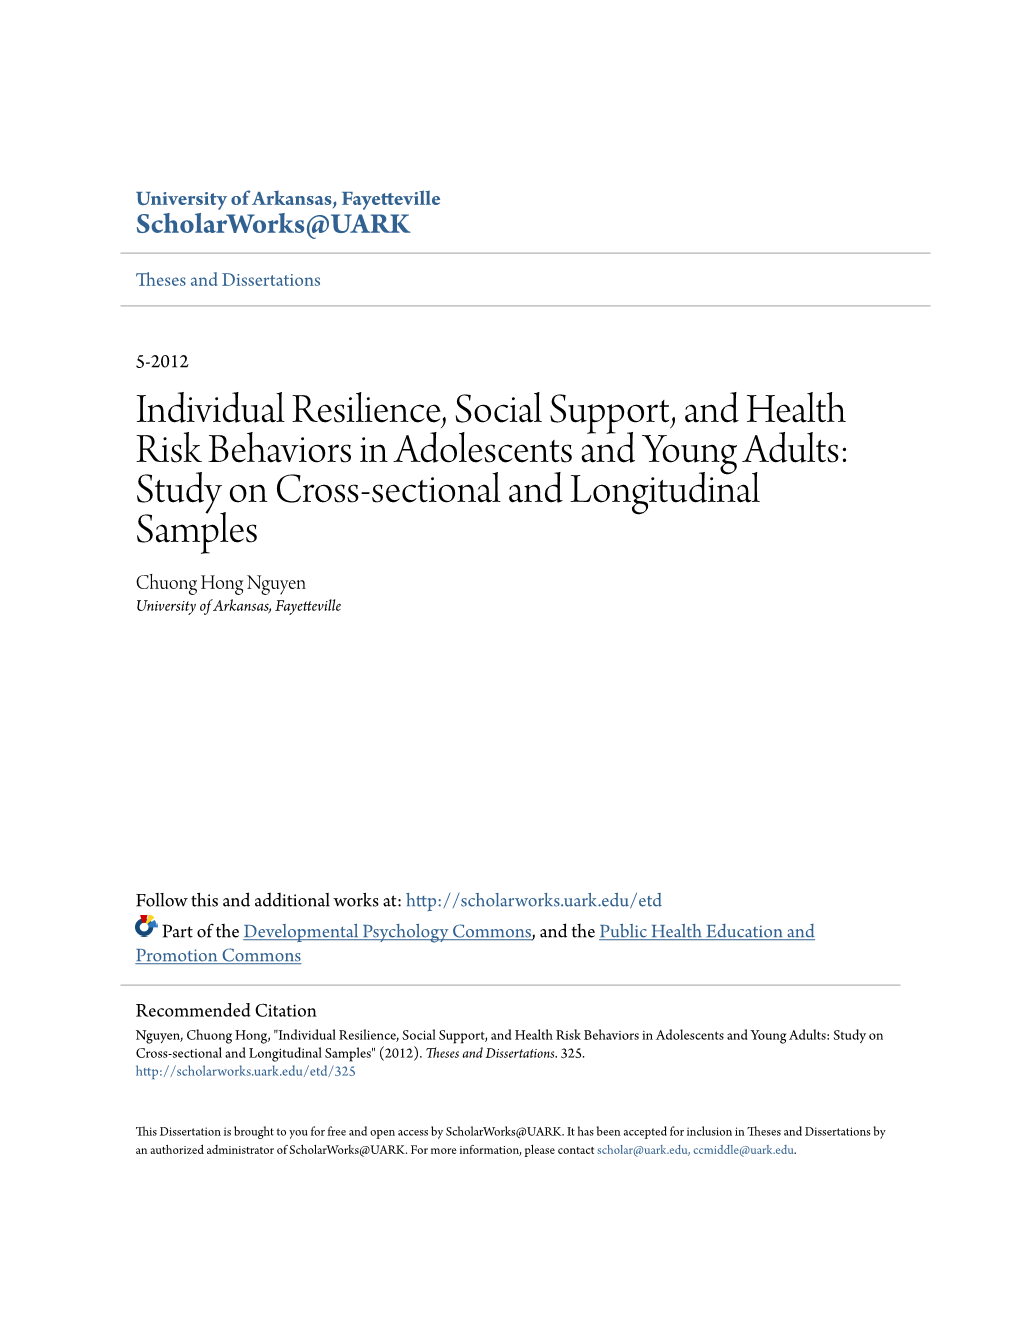 Individual Resilience, Social Support, and Health Risk Behaviors In